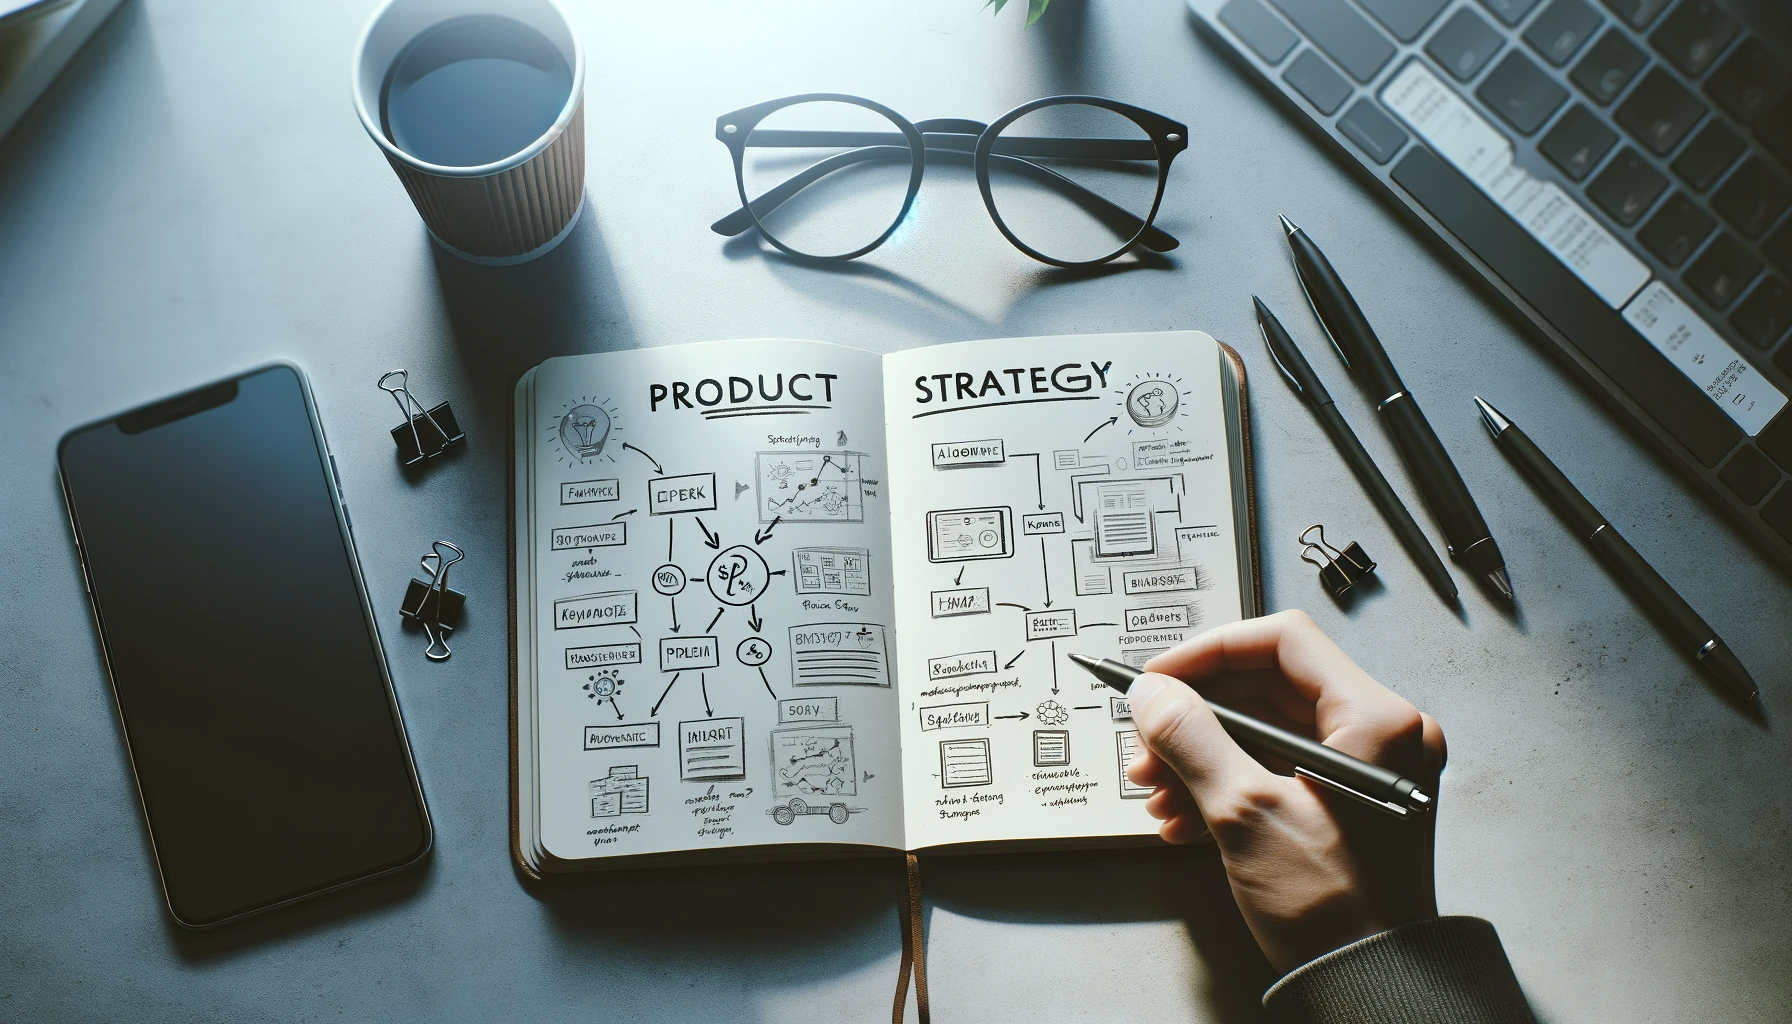 How to Create and Align Your Product Strategy: A Guide to Using Common Product Strategies and Best Practices